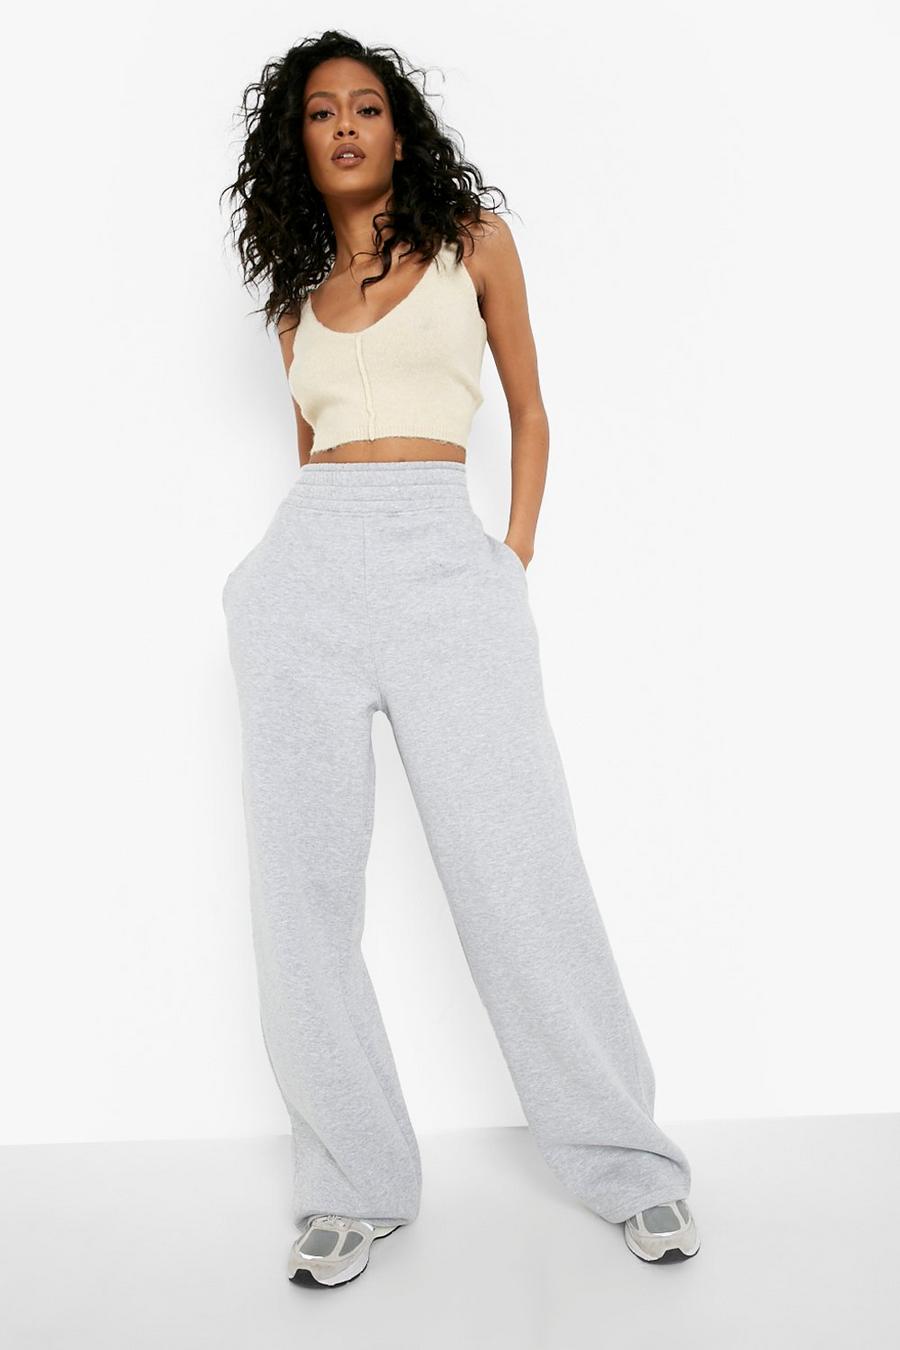 Casual Wear | Women's Casual Clothes & Casual Outfits | boohoo USA